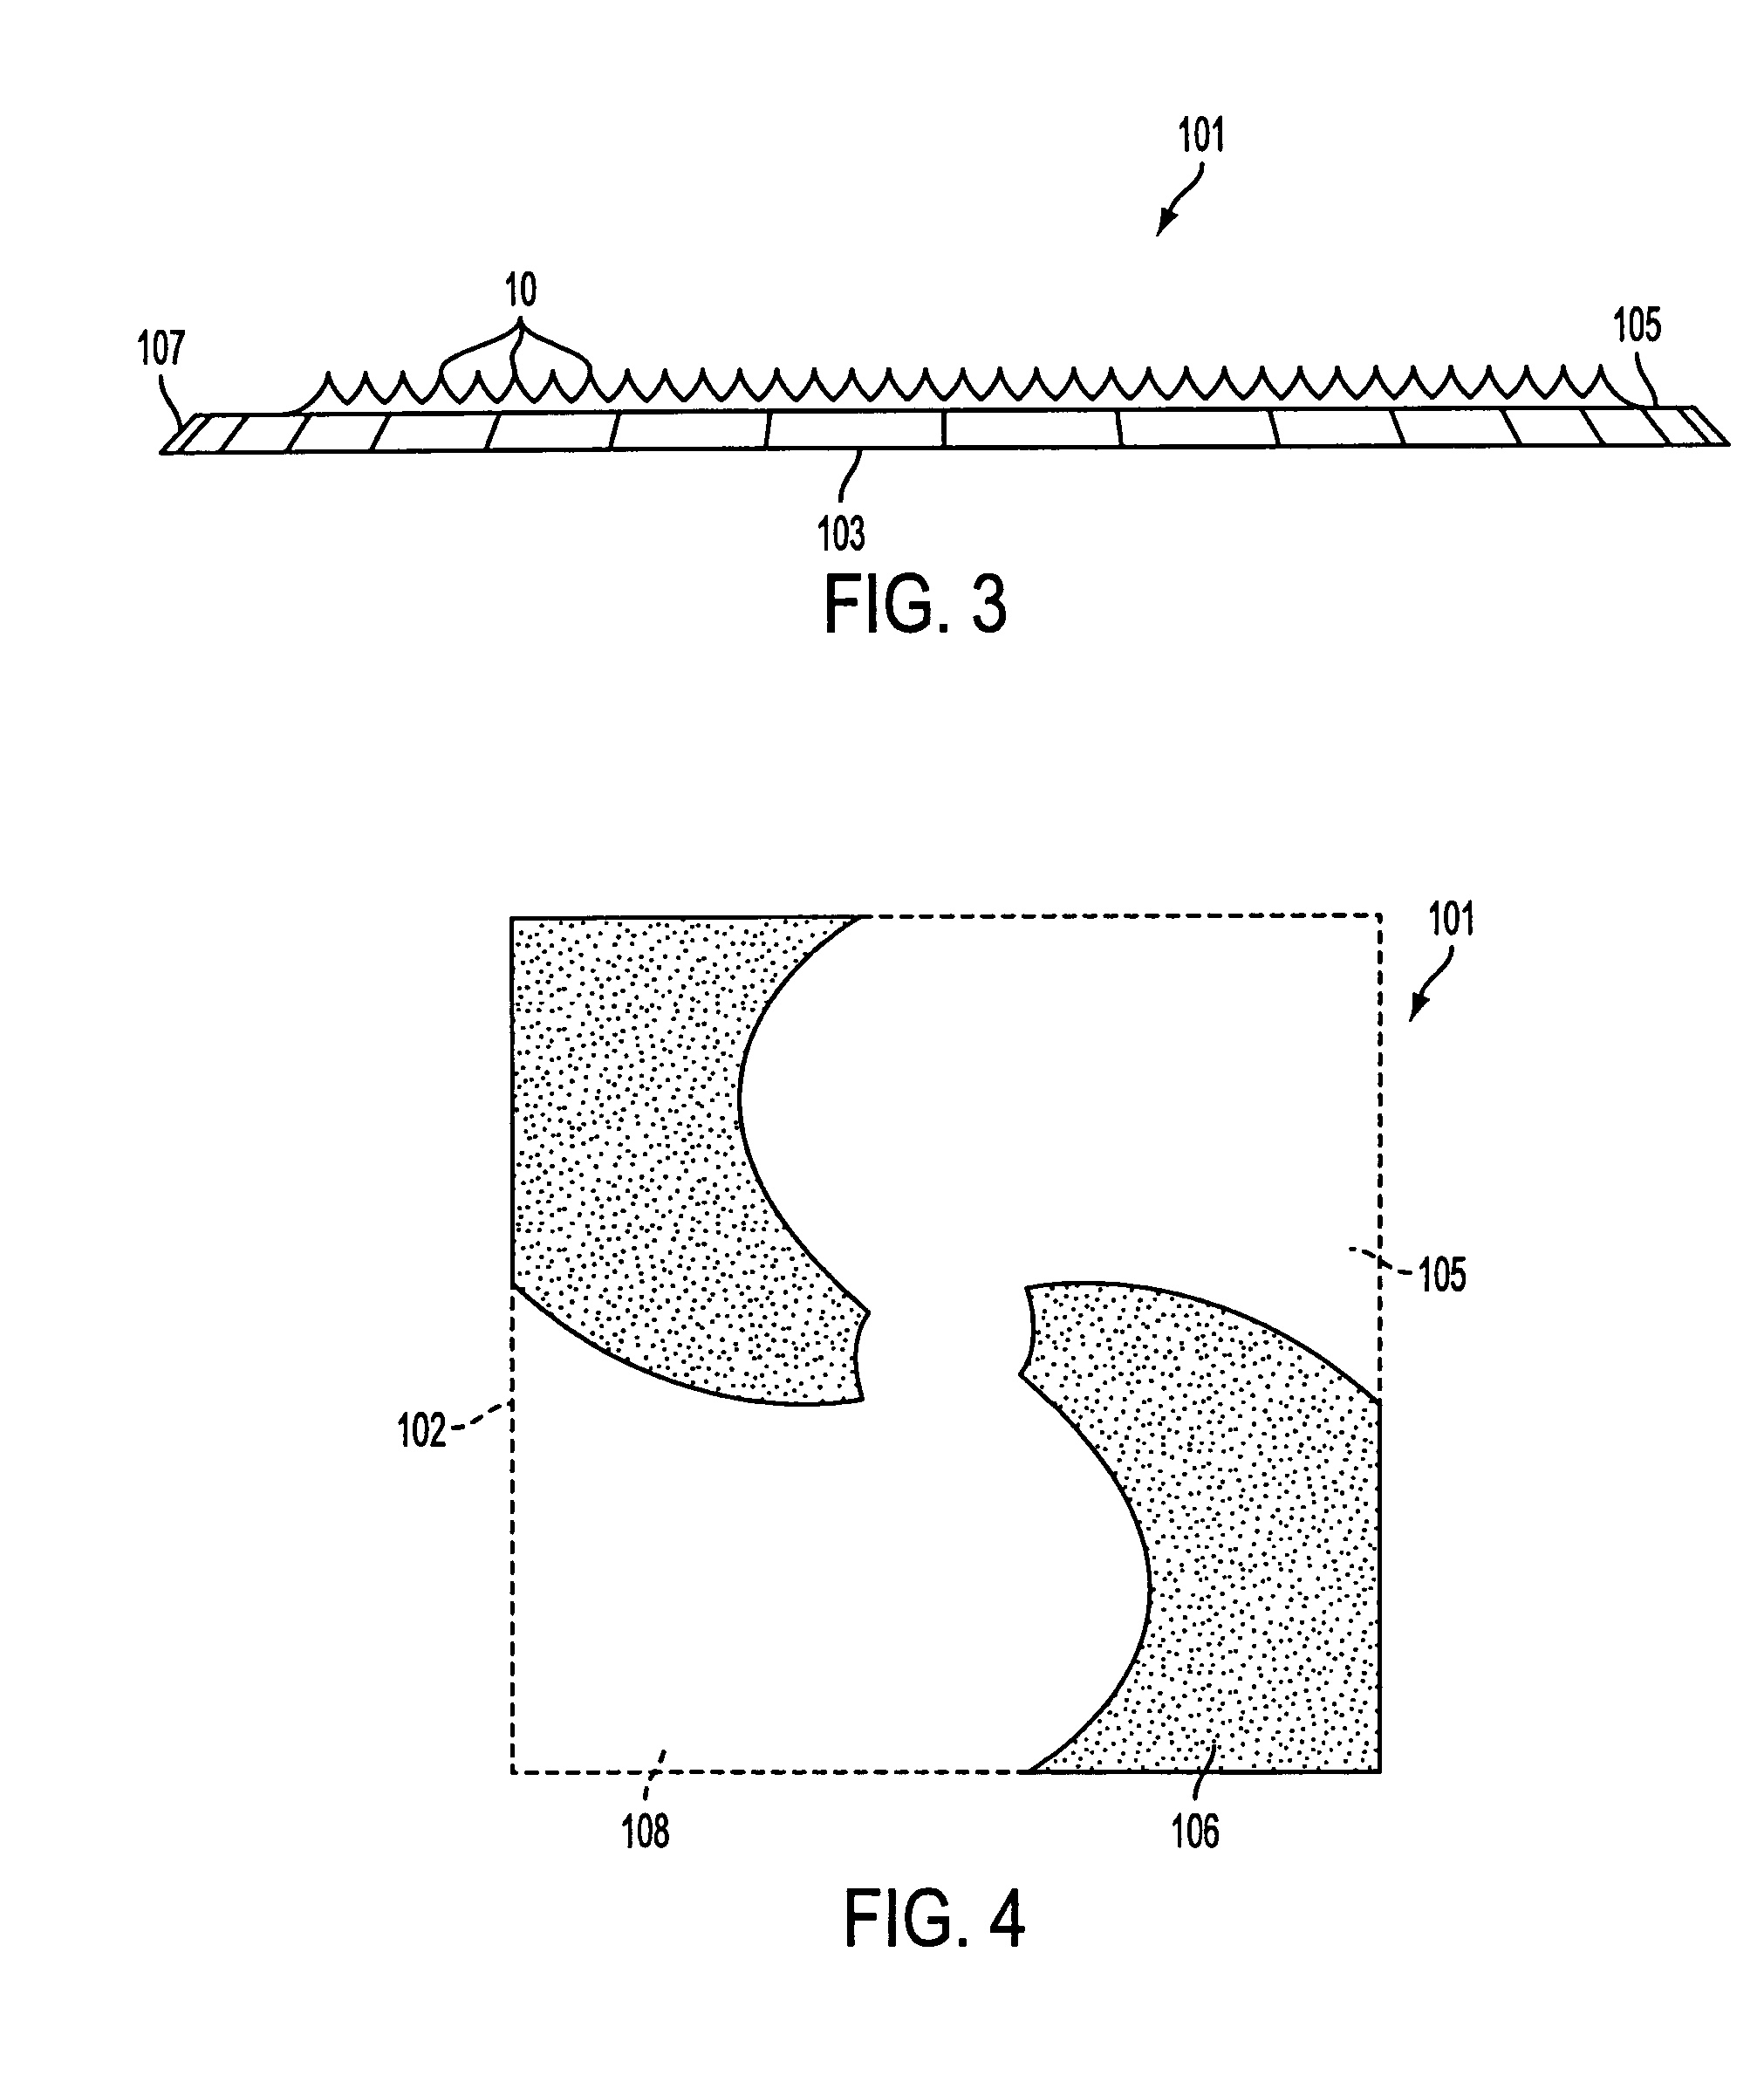 Microprotrusion arrays and methods for using same to deliver substances into tissue